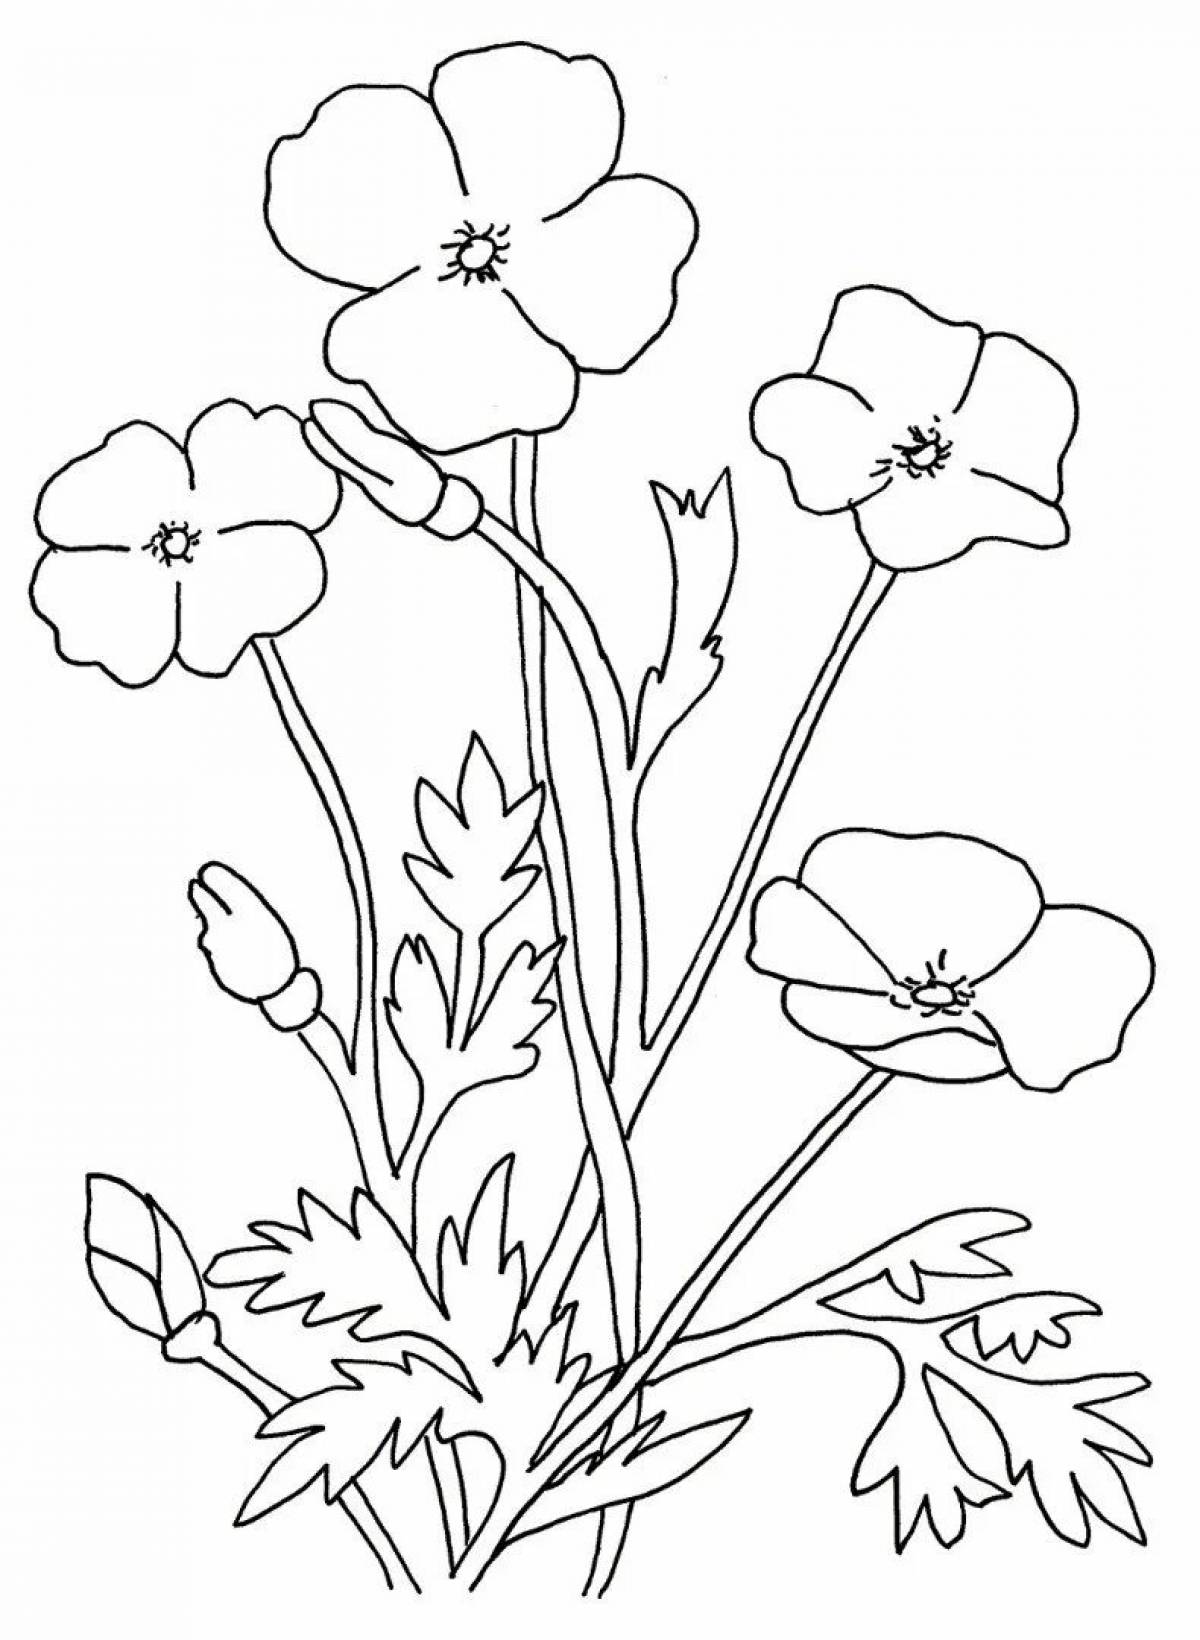 Coloring book shining poppy for children